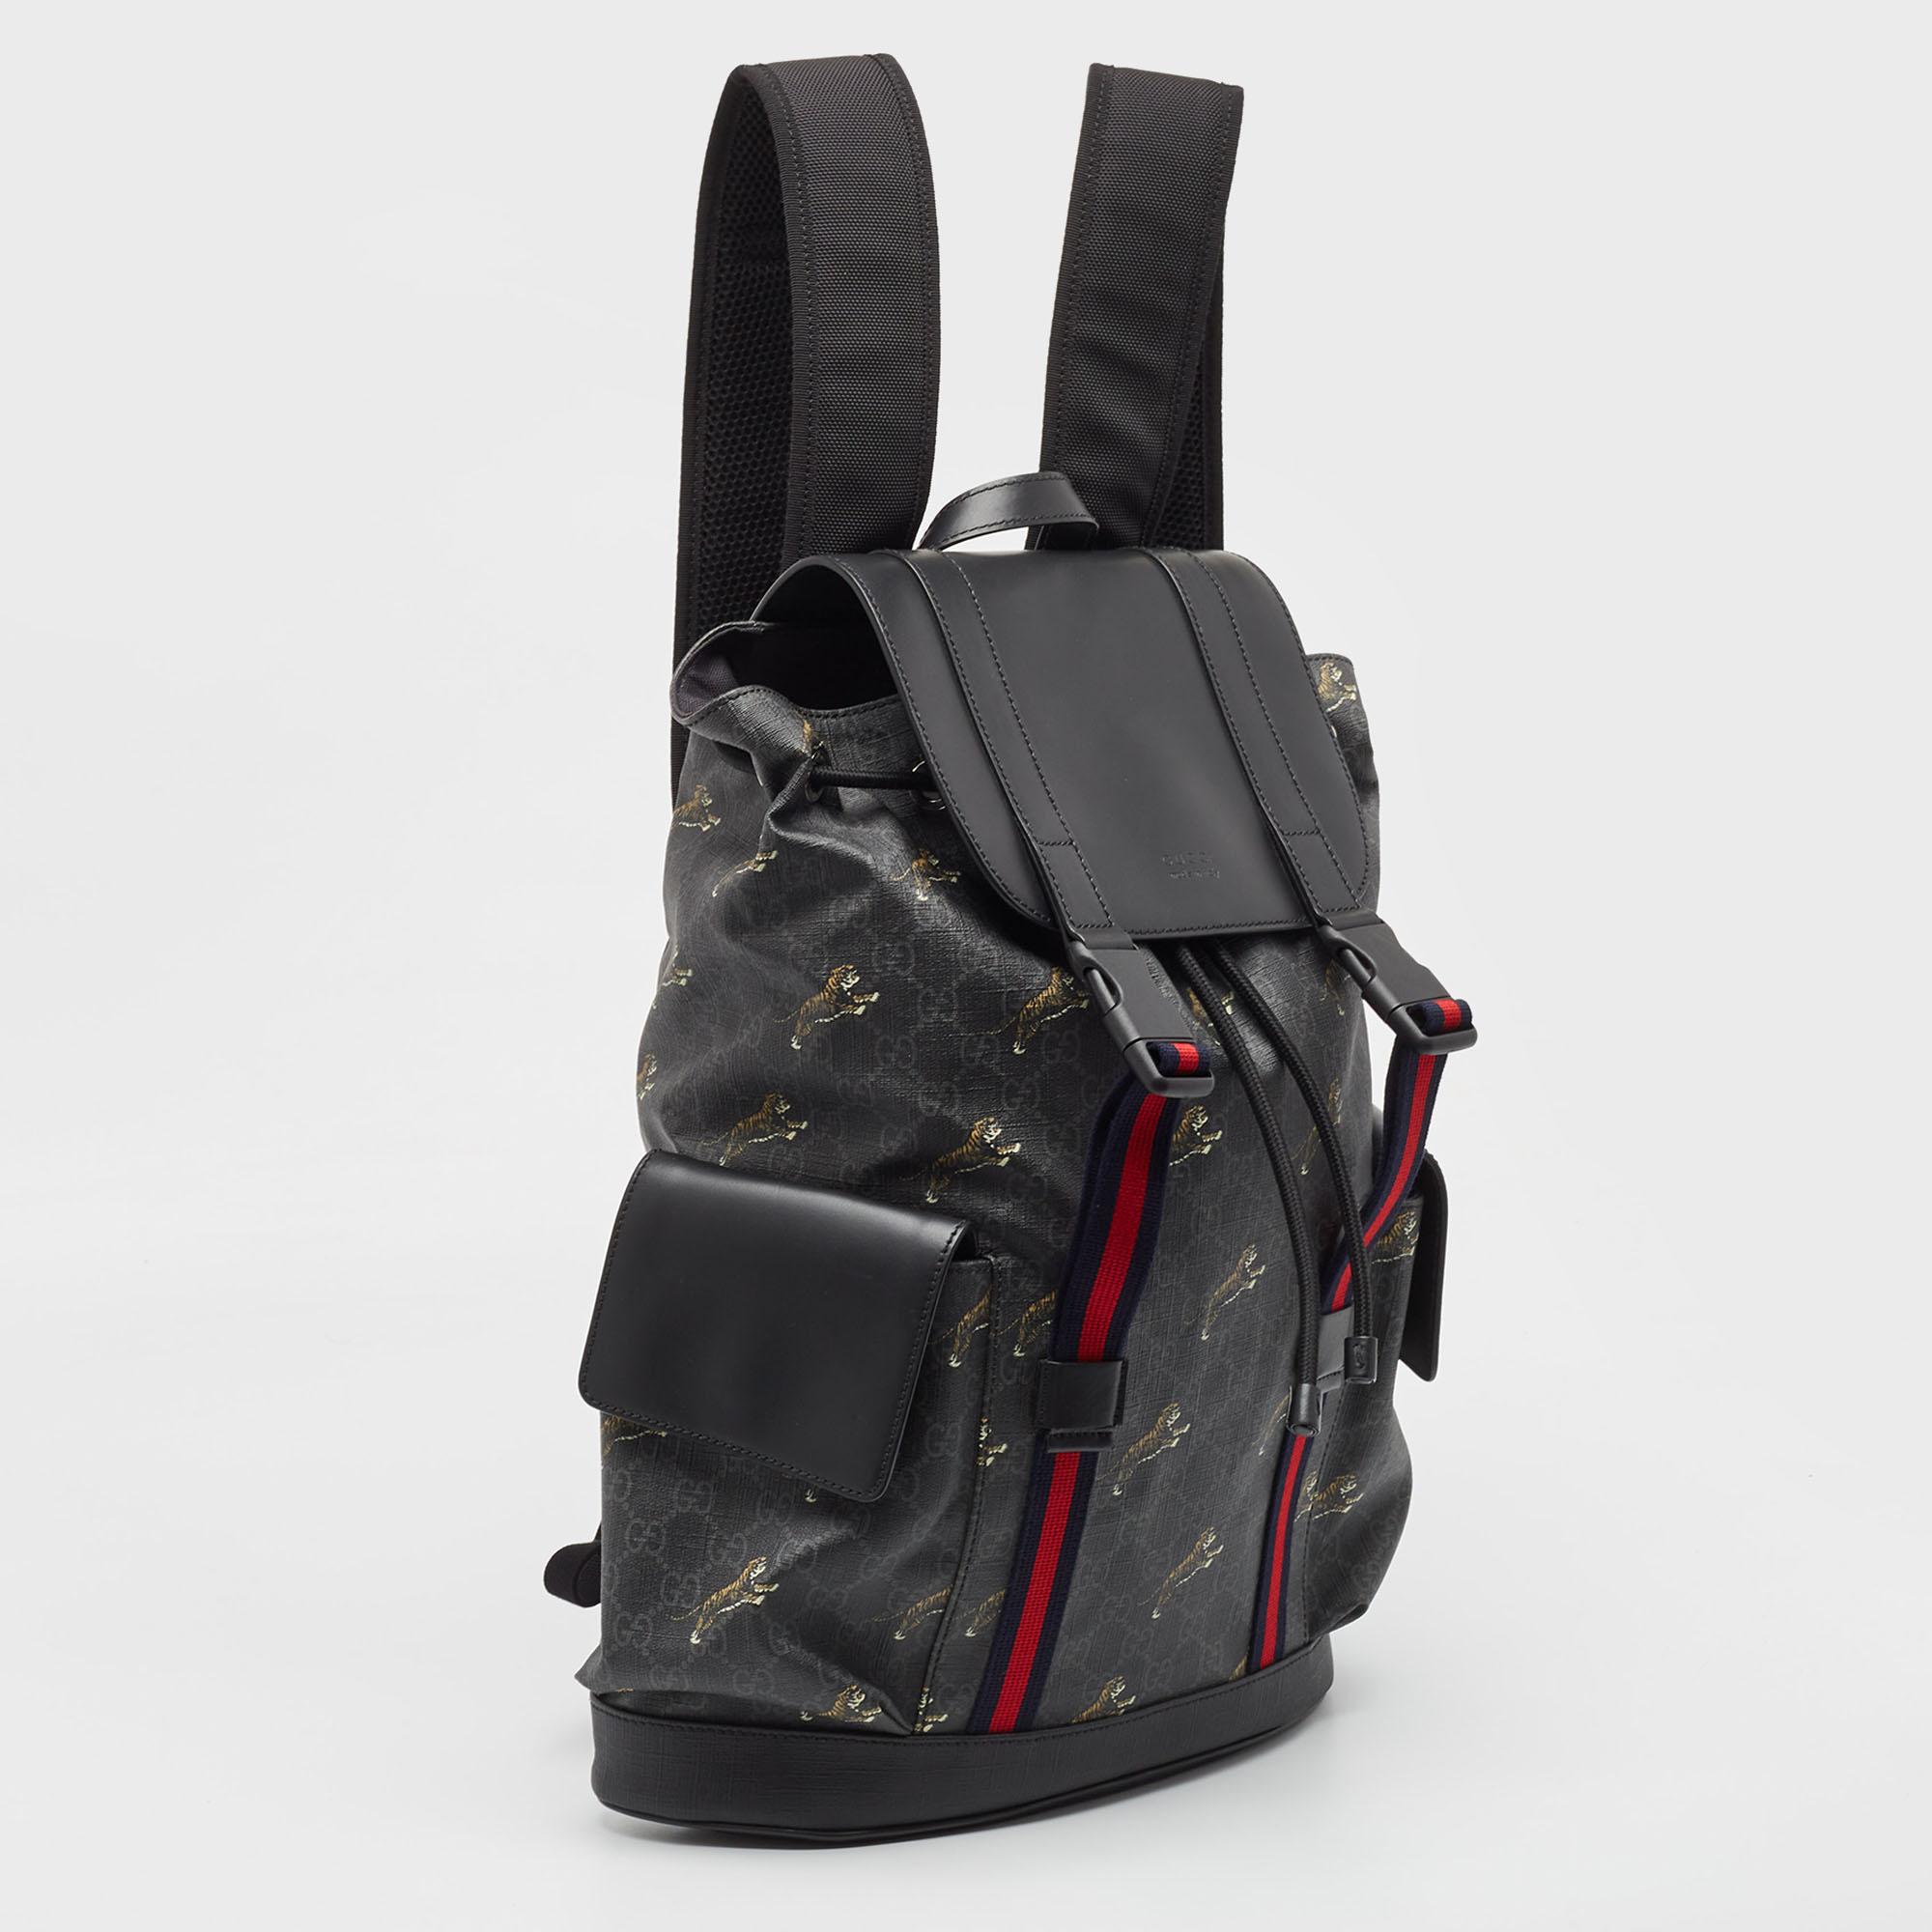 This durable and reliable Gucci backpack for men is made from high-grade materials in a functional design. The bag will also effortlessly complement your style.

